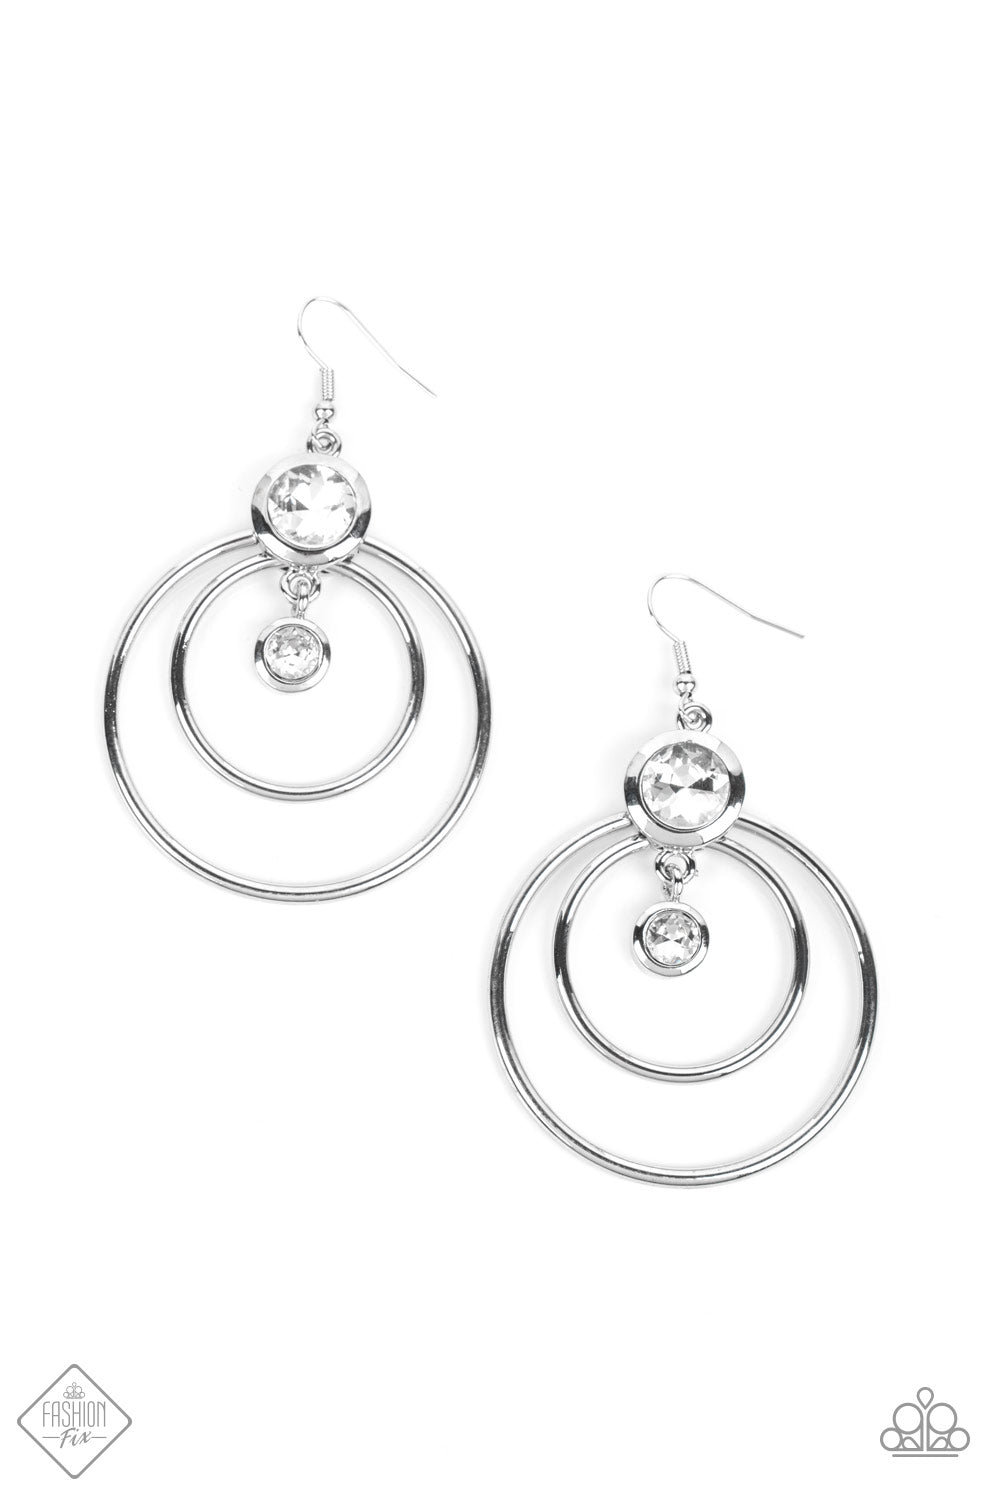 Dapperly Deluxe - Silver Fashion Earrings - Paparazzi Accessories - Two airy hoops anchor an oversized white rhinestone set in a thick silver frame for some playful movement. Dangling below the oversized white rhinestone, a dainty rhinestone set in the same frame and shimmer adds additional luxury. Earring attaches to a standard fishhook fitting. Sold as one pair of earrings.